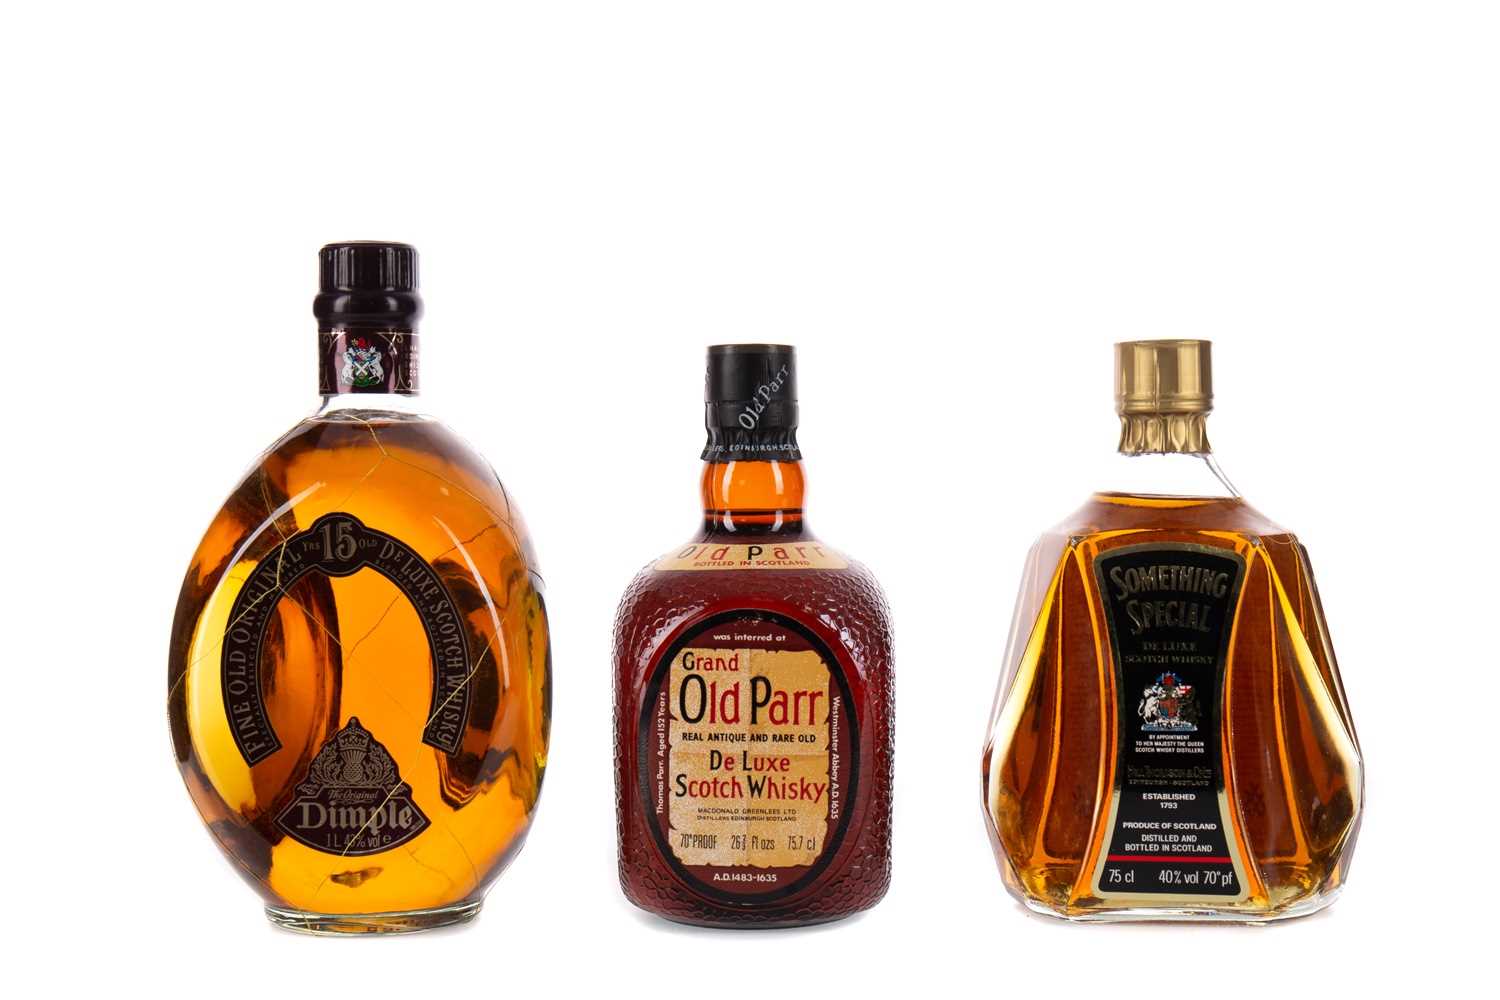 Lot 98 - DIMPLE 15 YEARS OLD, GRAND OLD PARR, AND SOMETHING SPECIAL